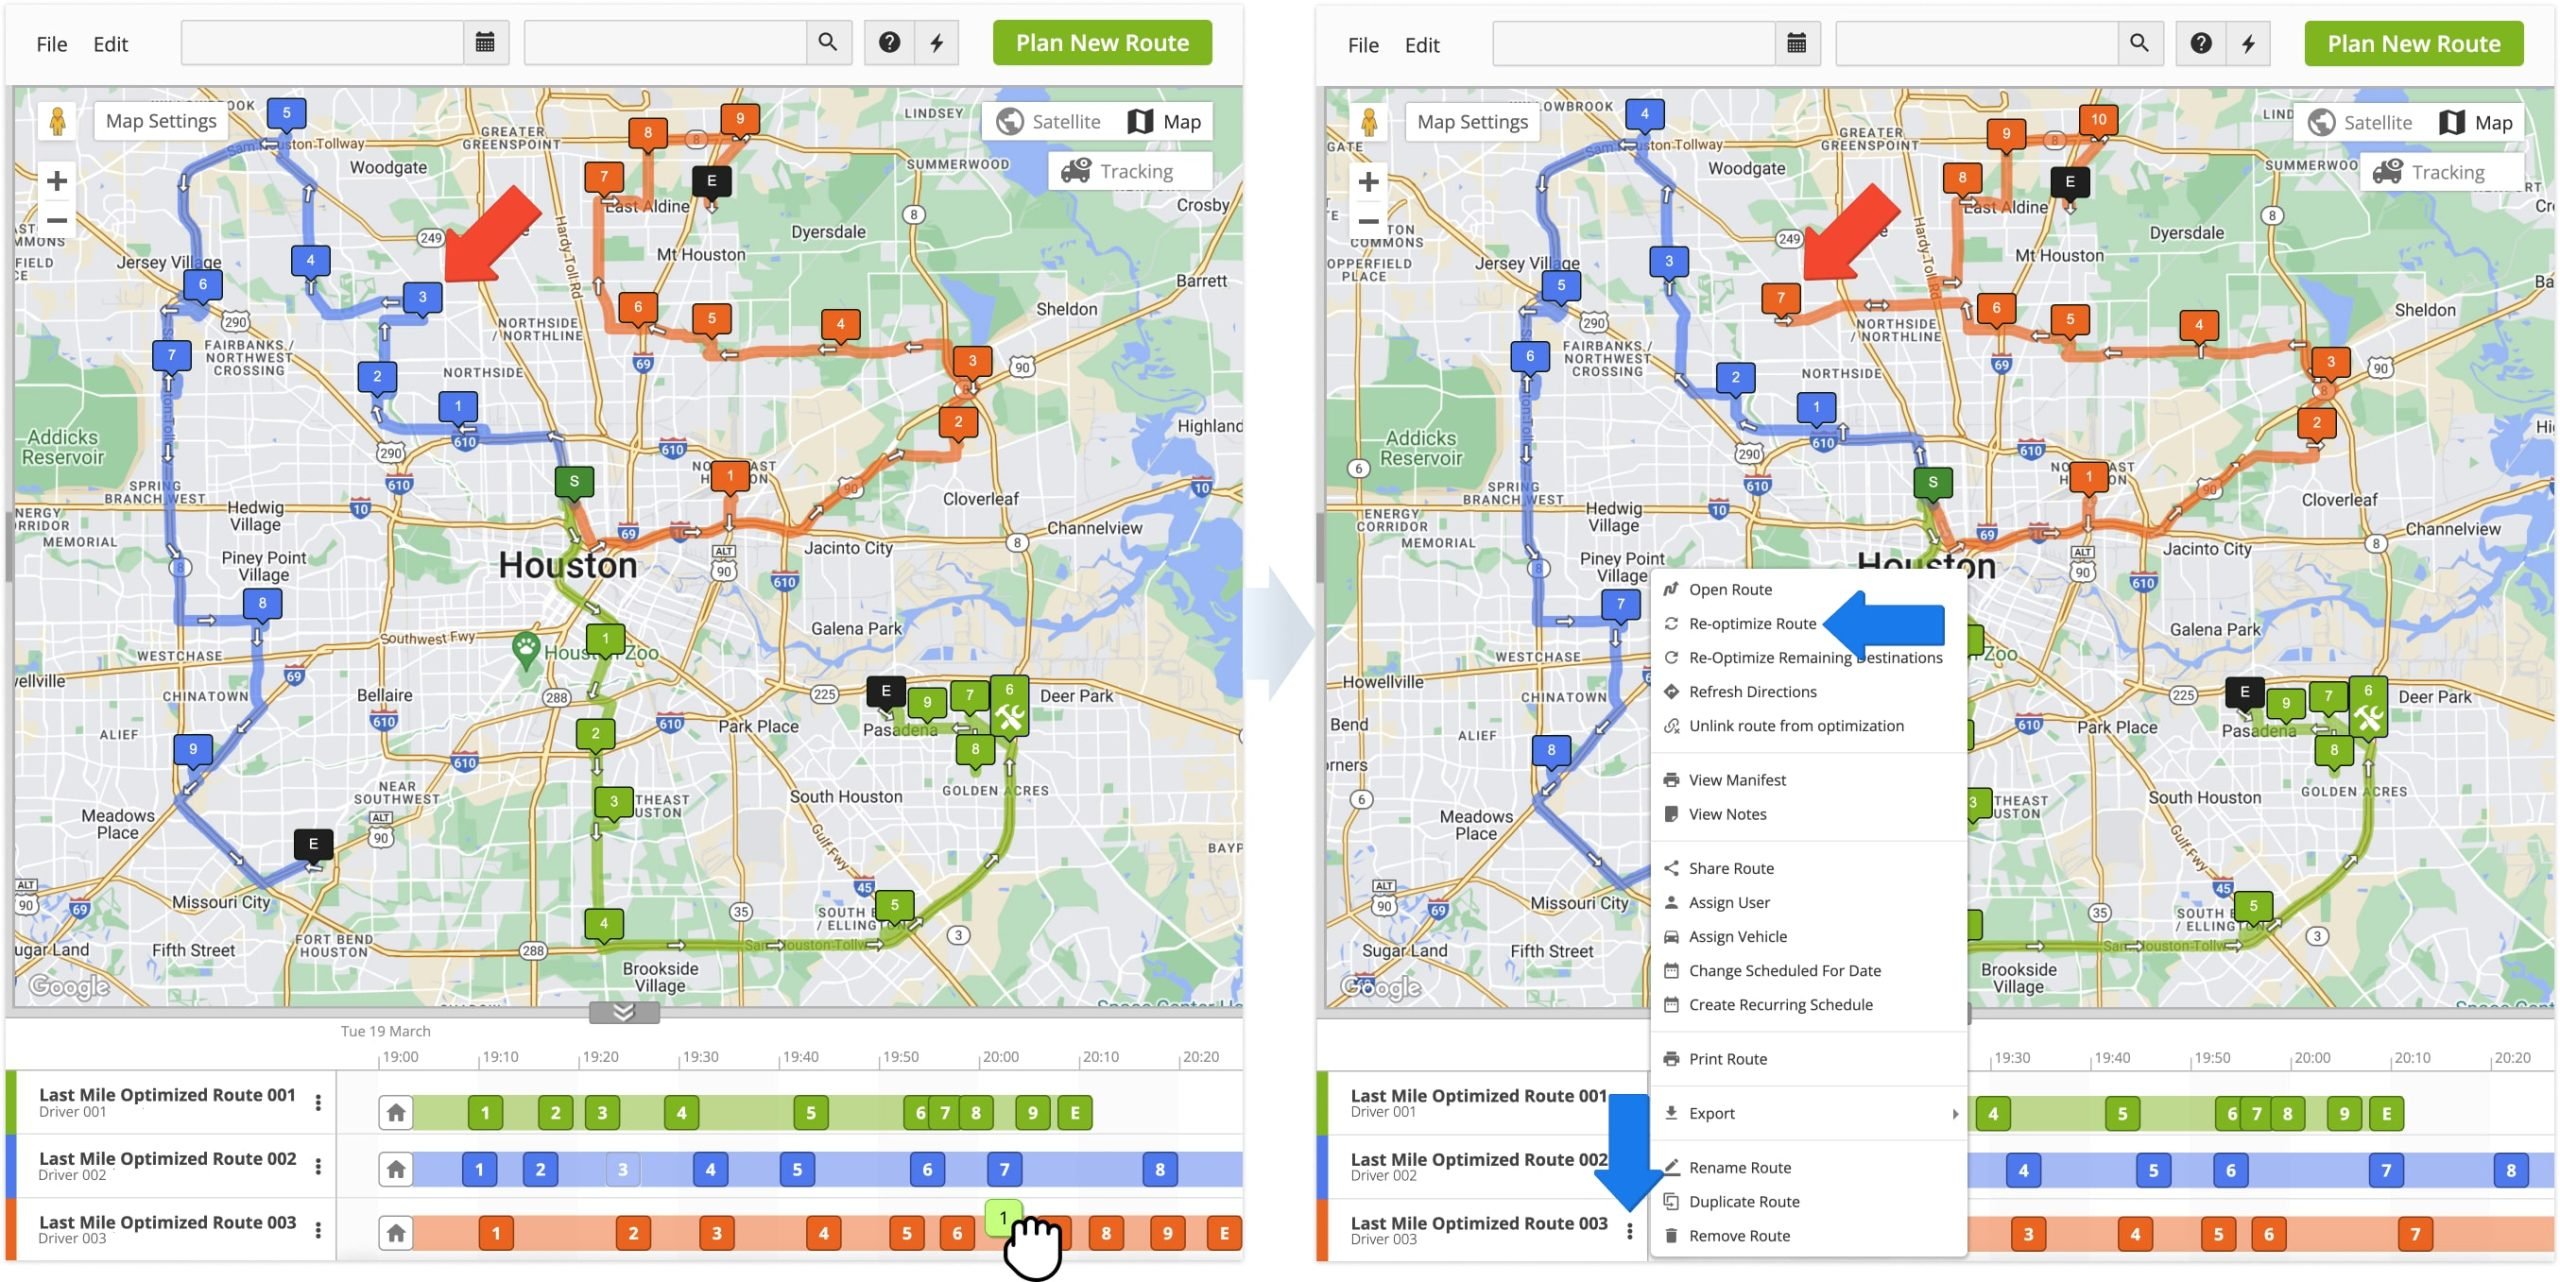 To move a destination to a different sequence position in the same route or to an entirely different route, click and drag the destination to the preferred position. The Routes Map will update your routes accordingly.